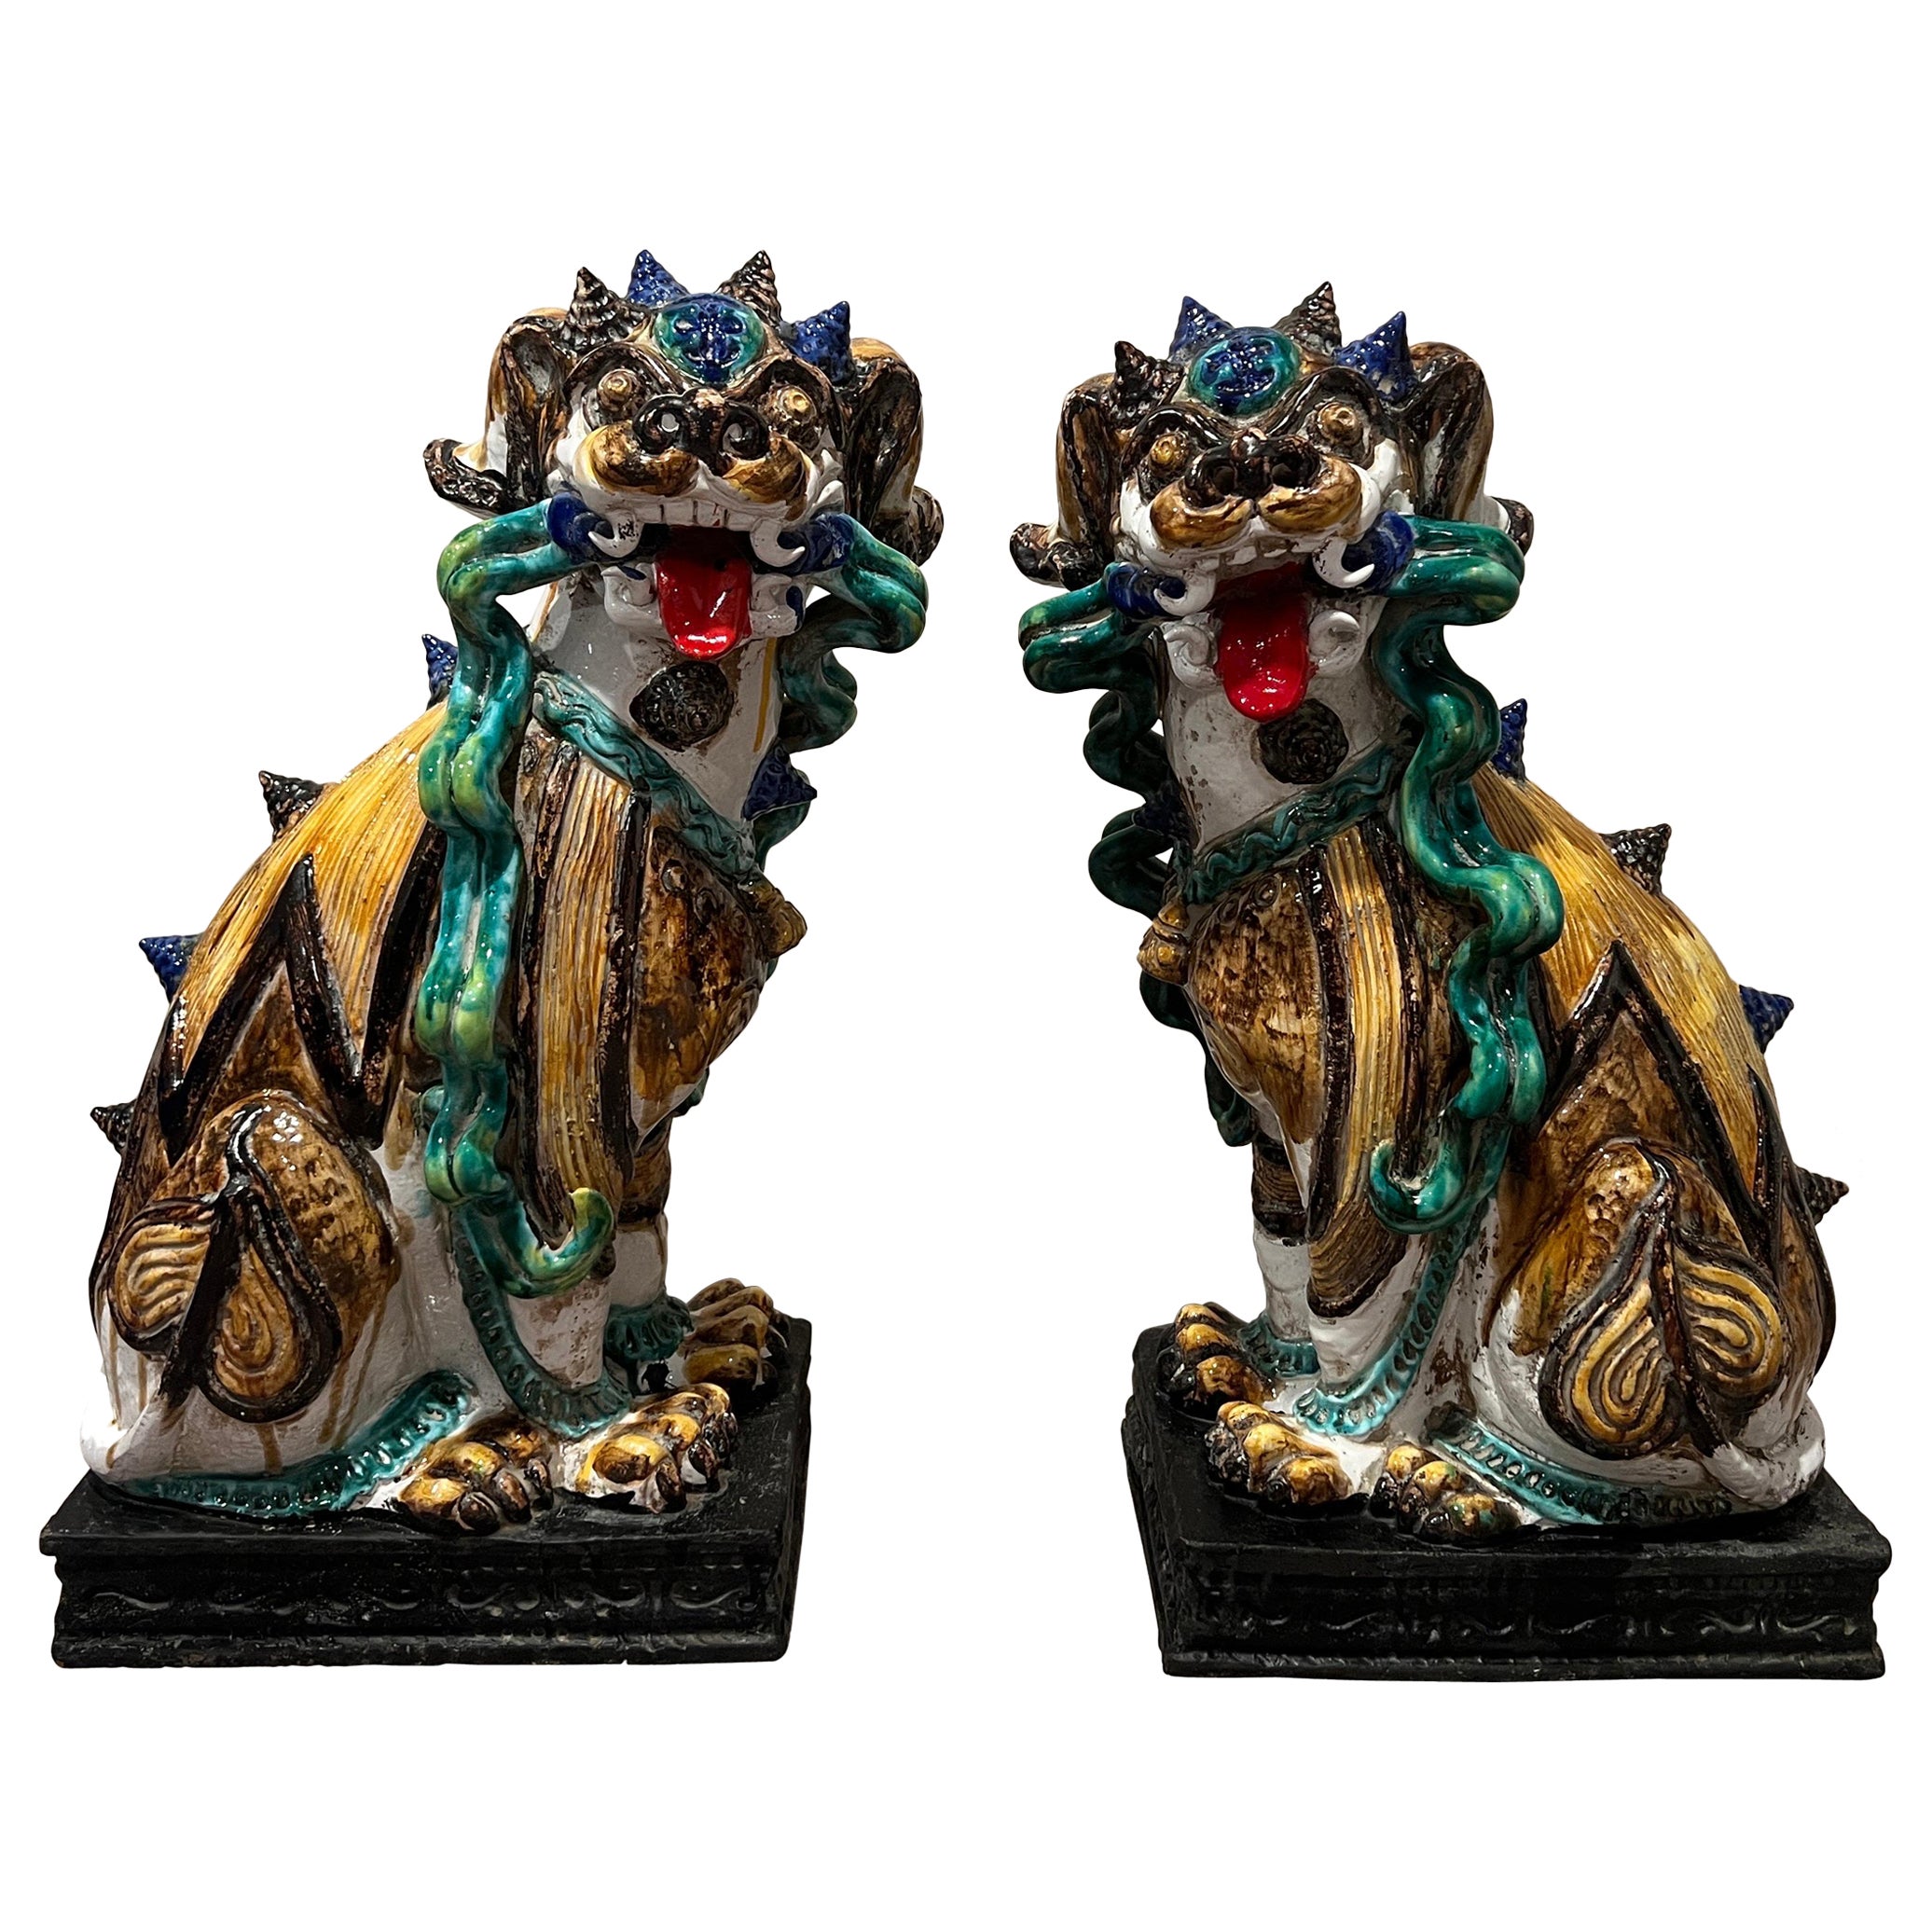 Large Scale Pair of Antique Majolica Ceramic Glazed Guardian Lions or Foo Dogs